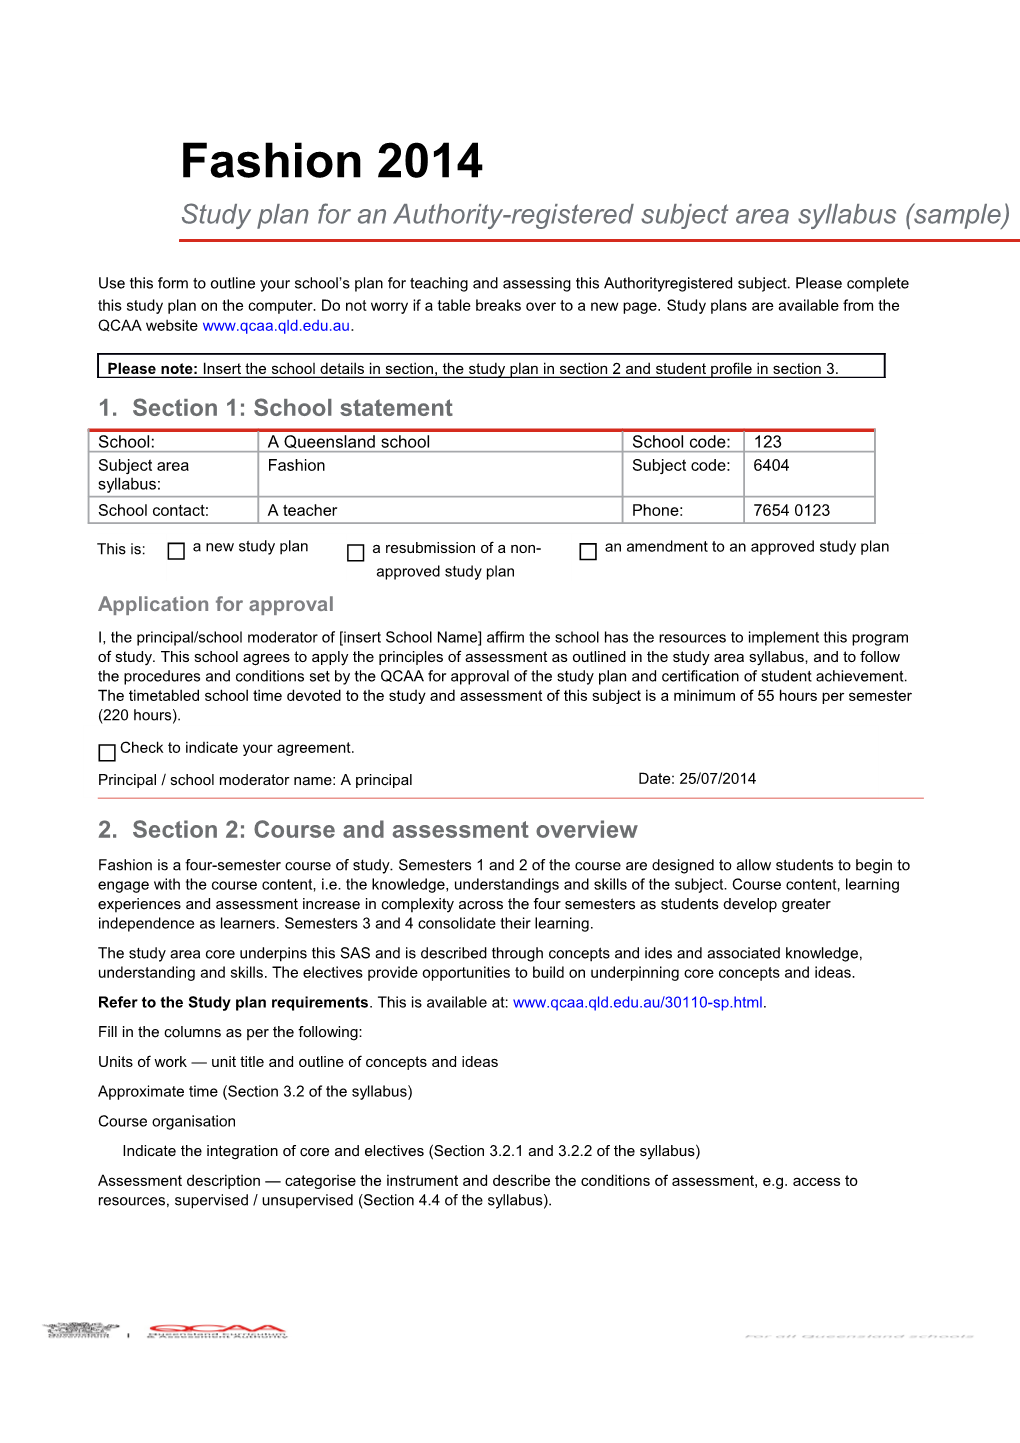 Fashion 2014 Study Plan for an Authority-Registered Subject Area Syllabus (Sample)